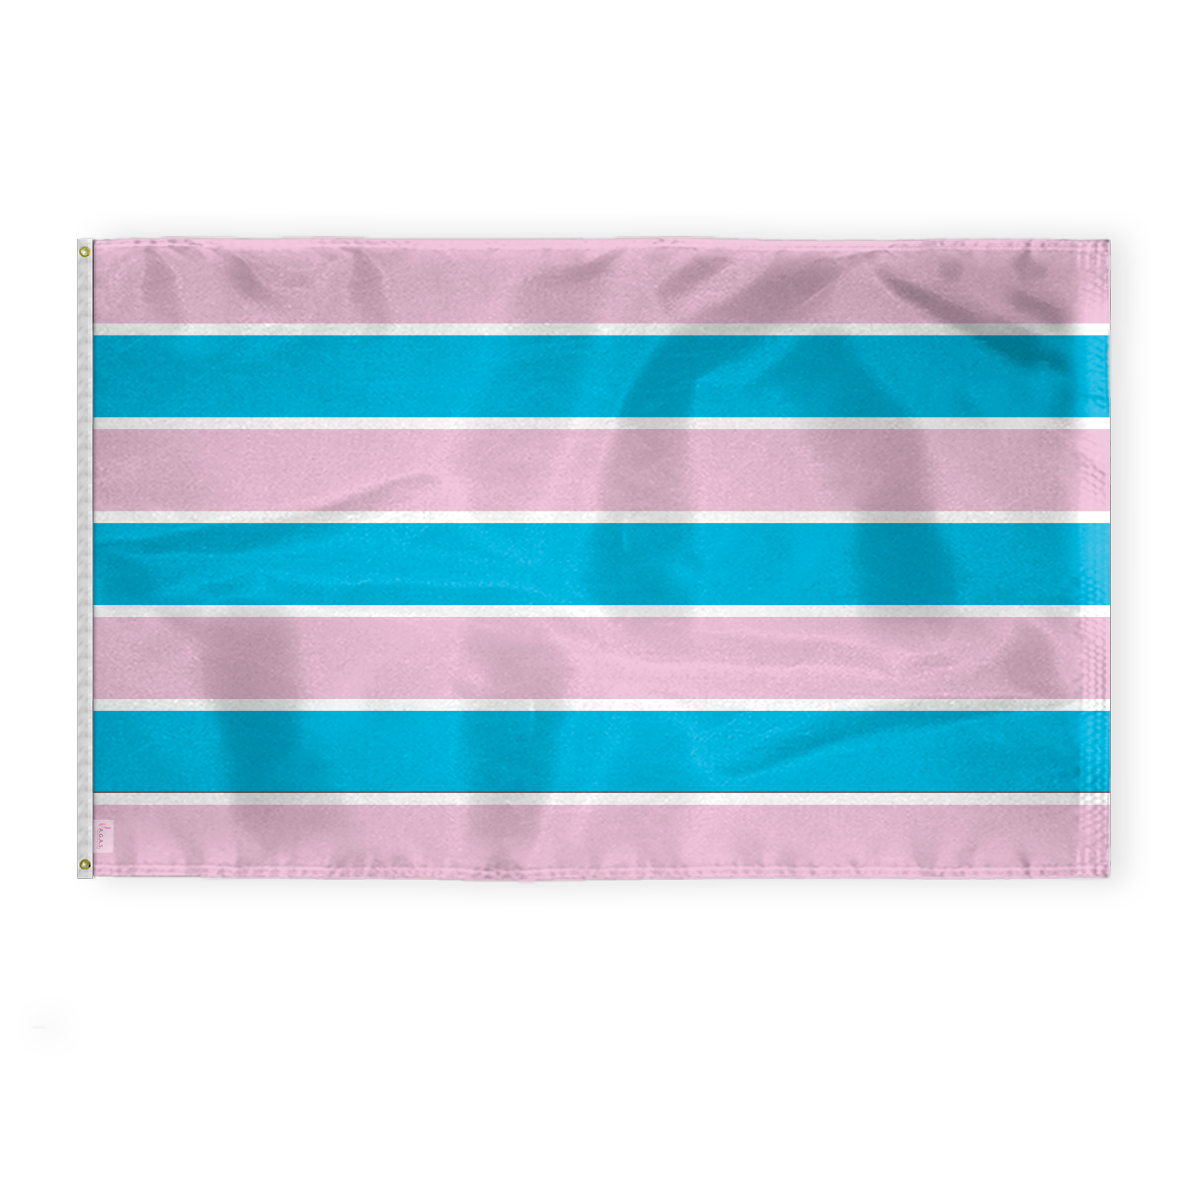 AGAS Transsexual Pride Flag 5x8 Ft - Double Sided Printed 200D Nylon